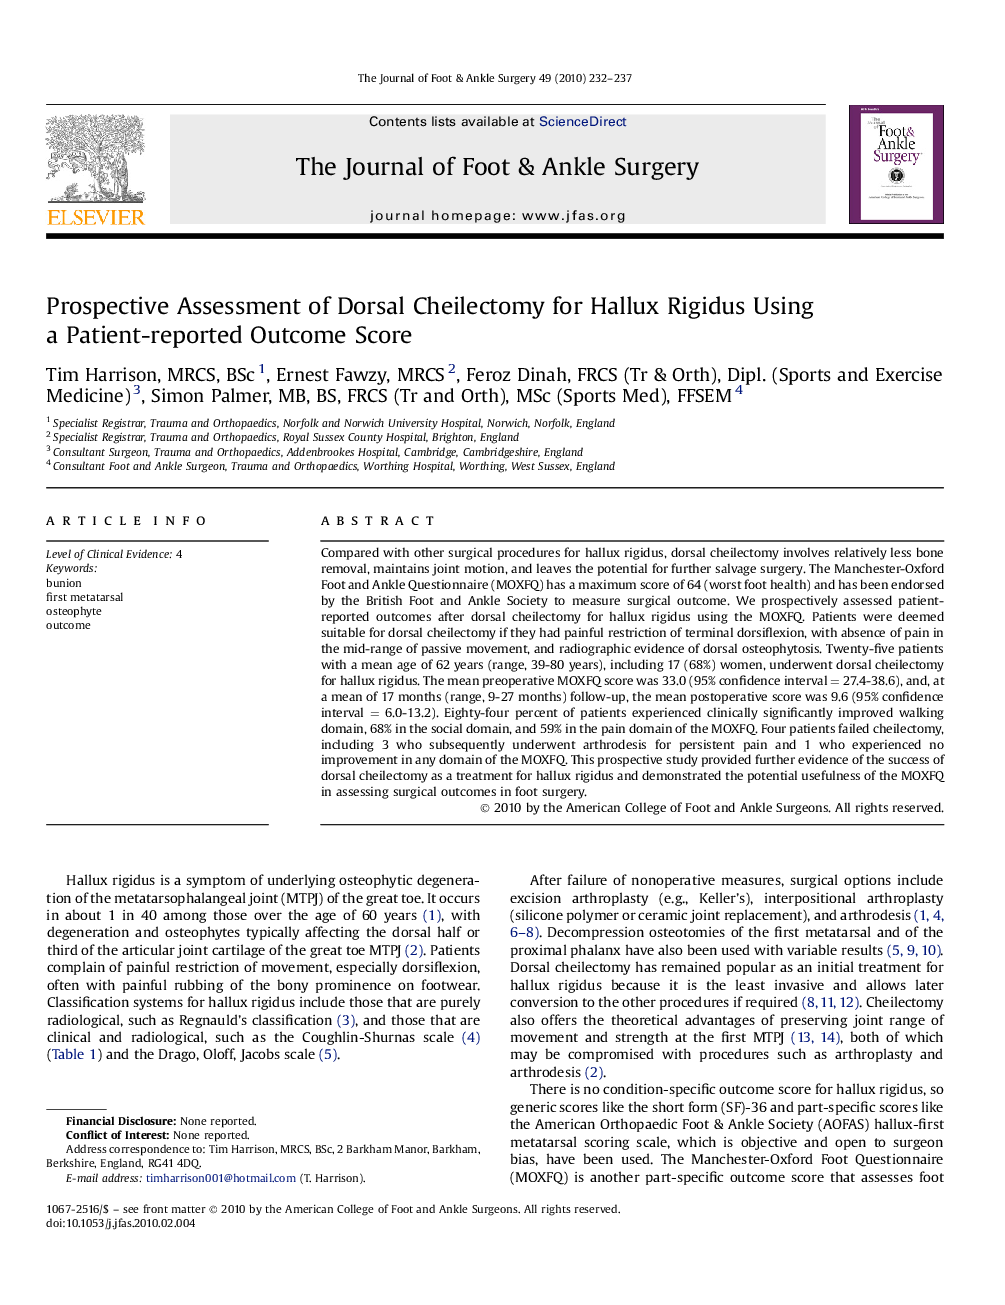 Prospective Assessment of Dorsal Cheilectomy for Hallux Rigidus Using a Patient-reported Outcome Score 